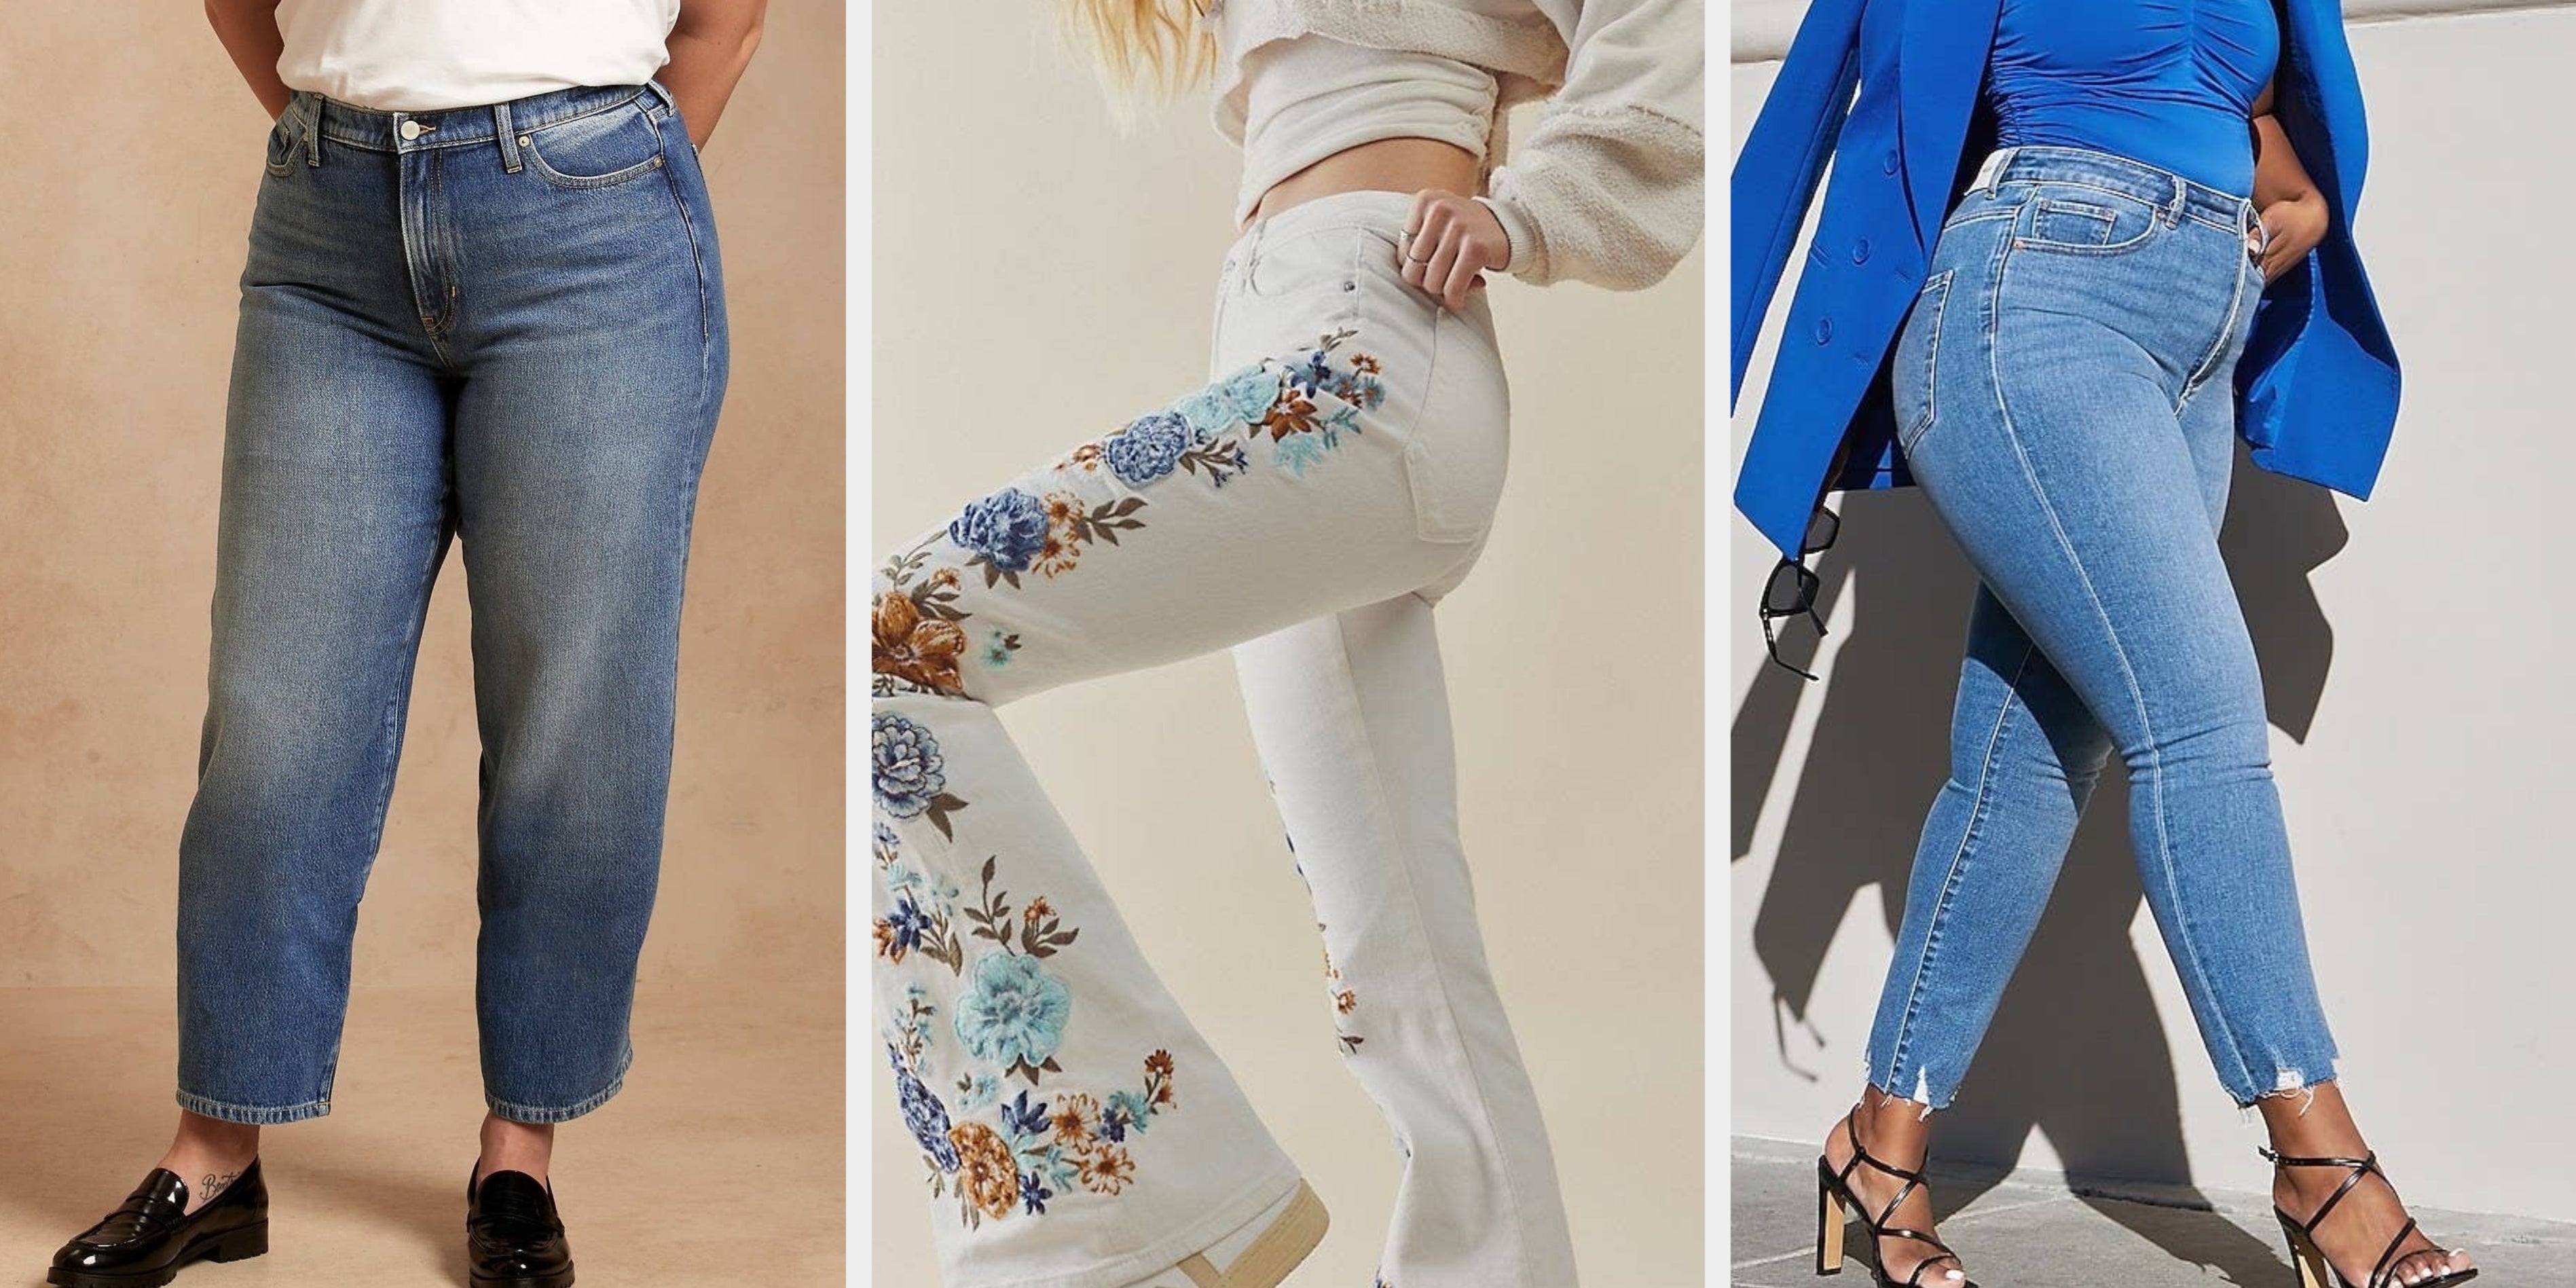 Shoppers Can't Stop Buying These $25 Jeans That 'Fit Like a